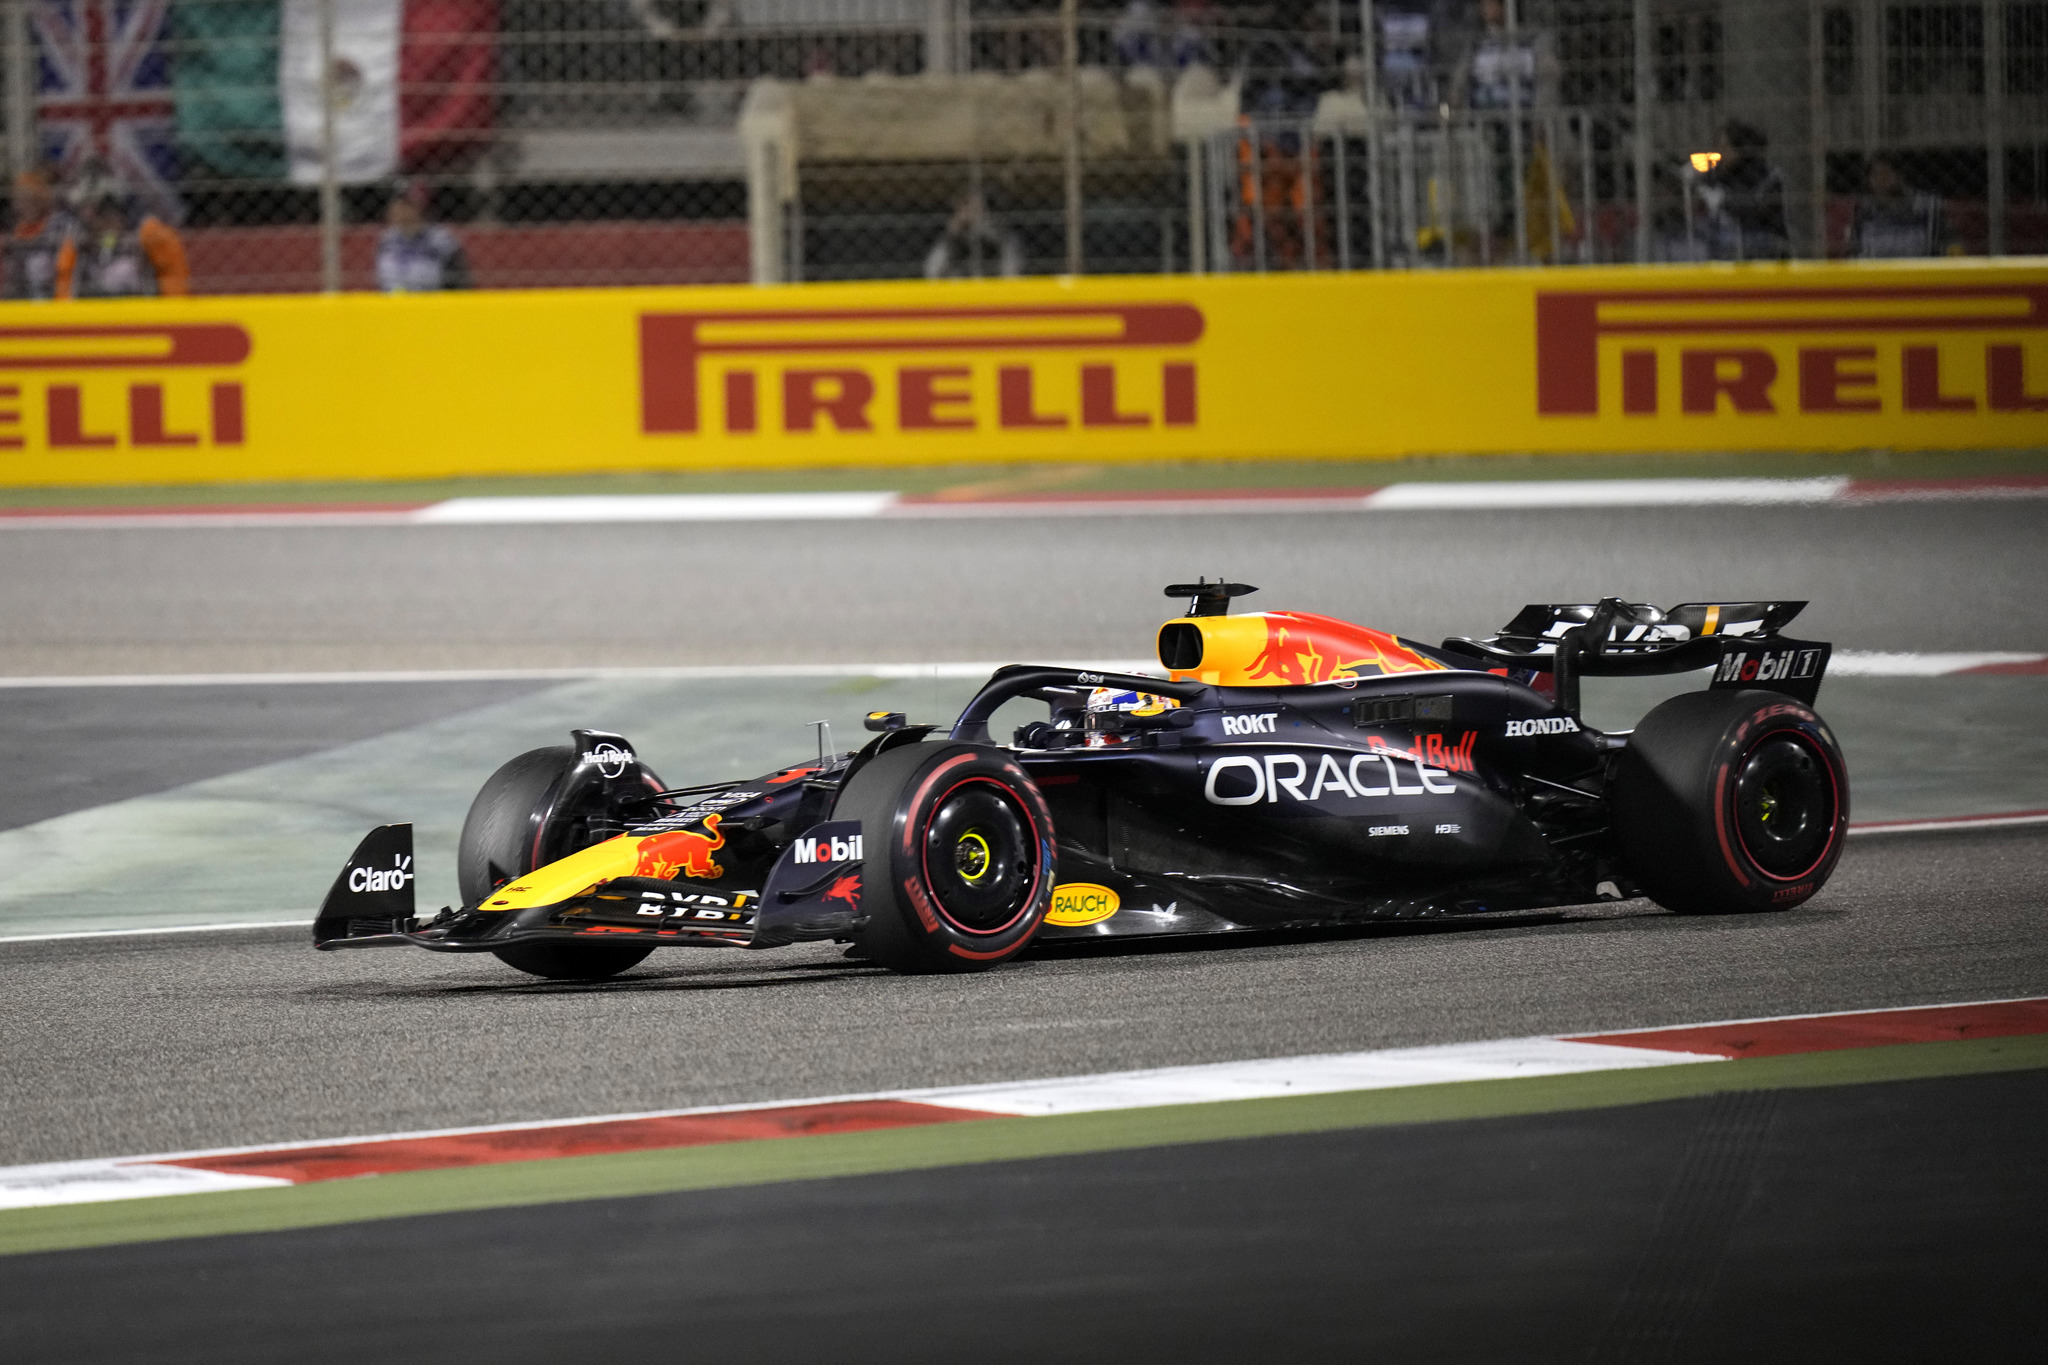 Red Bull driver Max Verstappen in action during the Bahrain Grand Prix